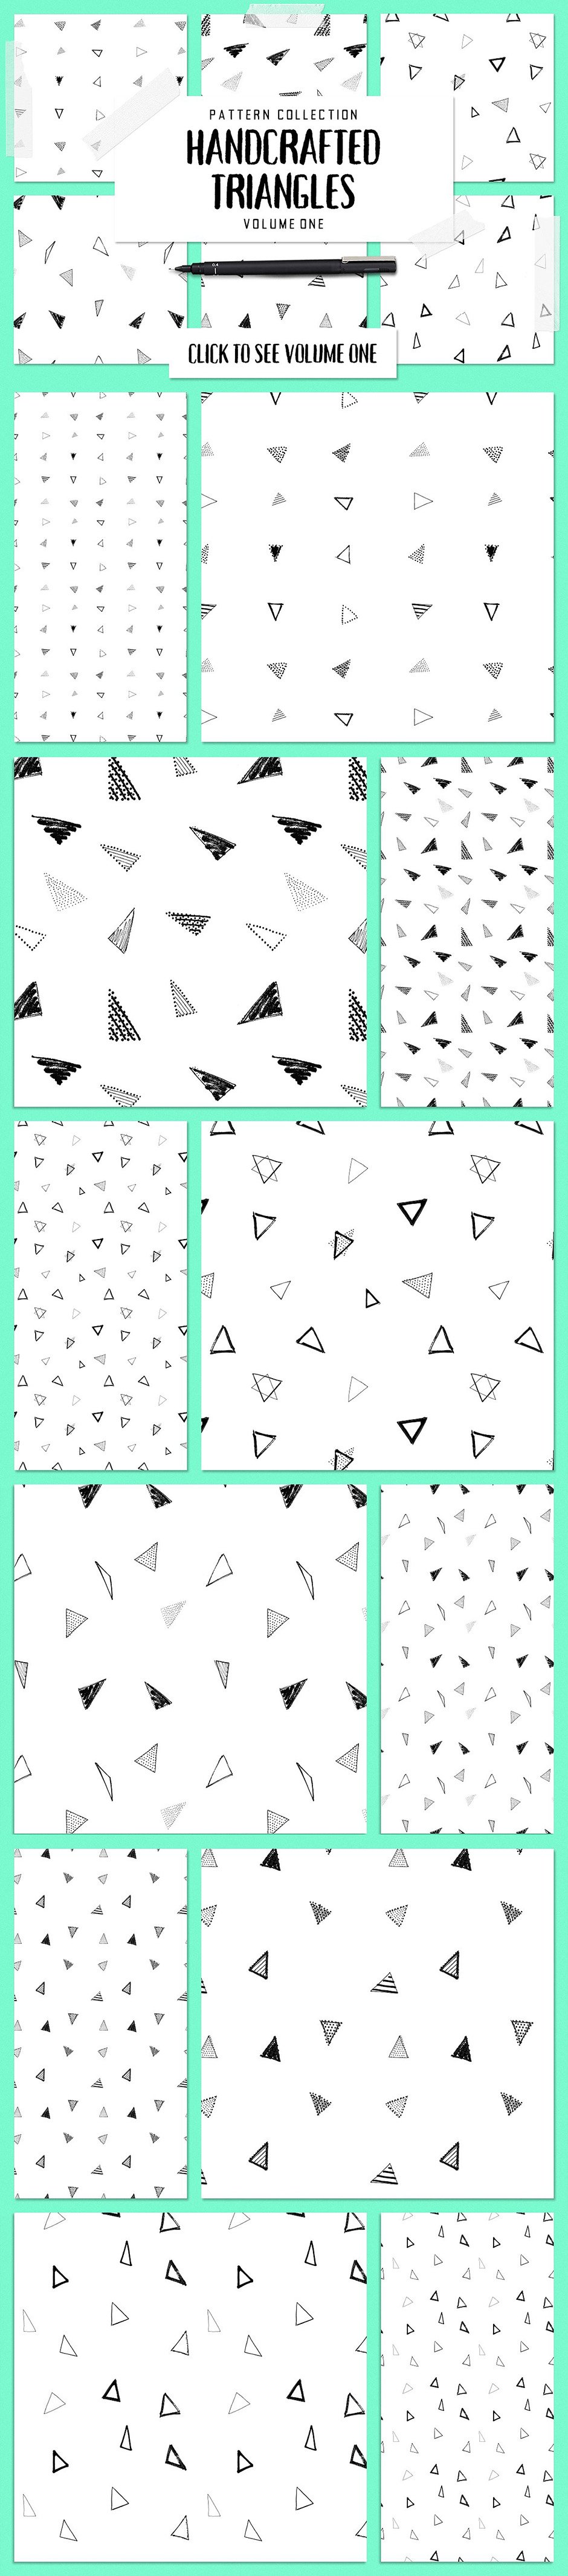 The Mega Mix Match Vector Triangles Pack